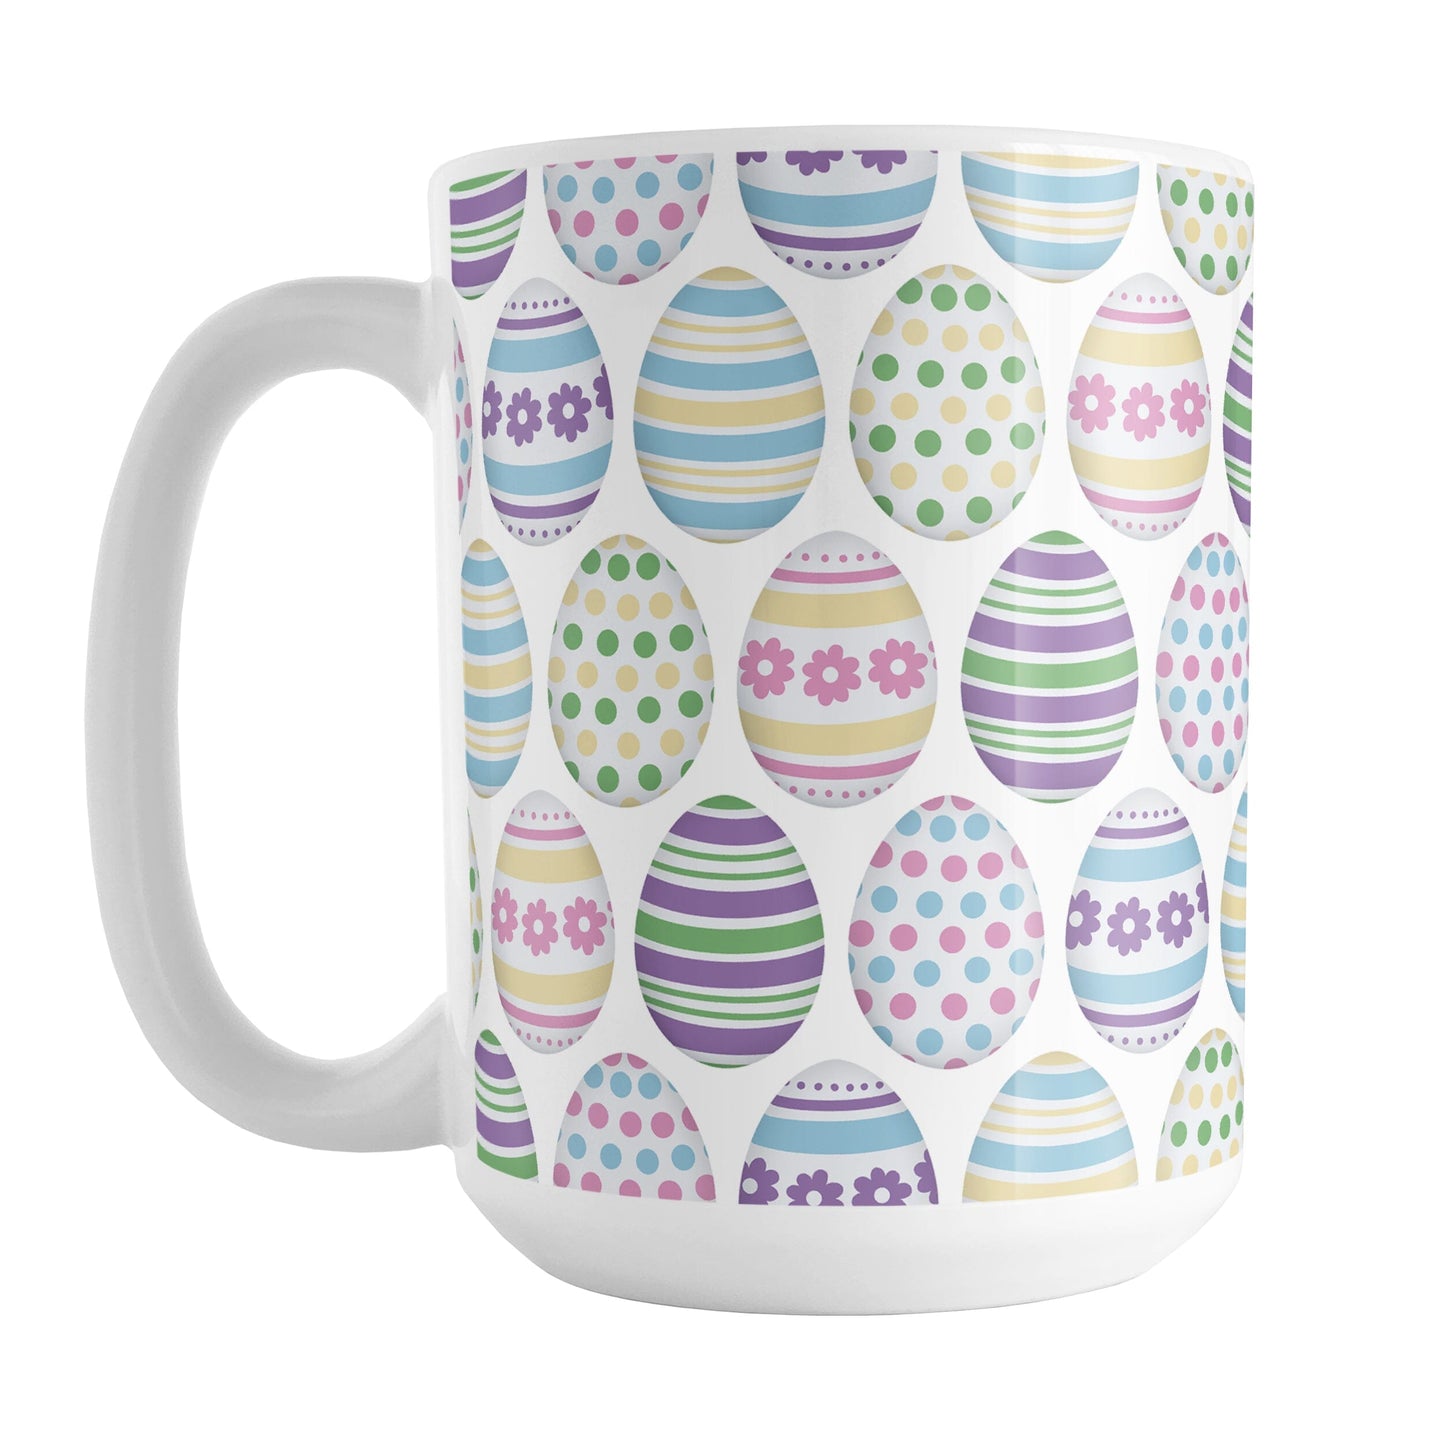 Easter Eggs Mug (15oz) at Amy's Coffee Mugs. A ceramic coffee mug designed with a pattern of Easter eggs decorated with stripes, polka dots, and flowers in fun Easter-inspired colors.